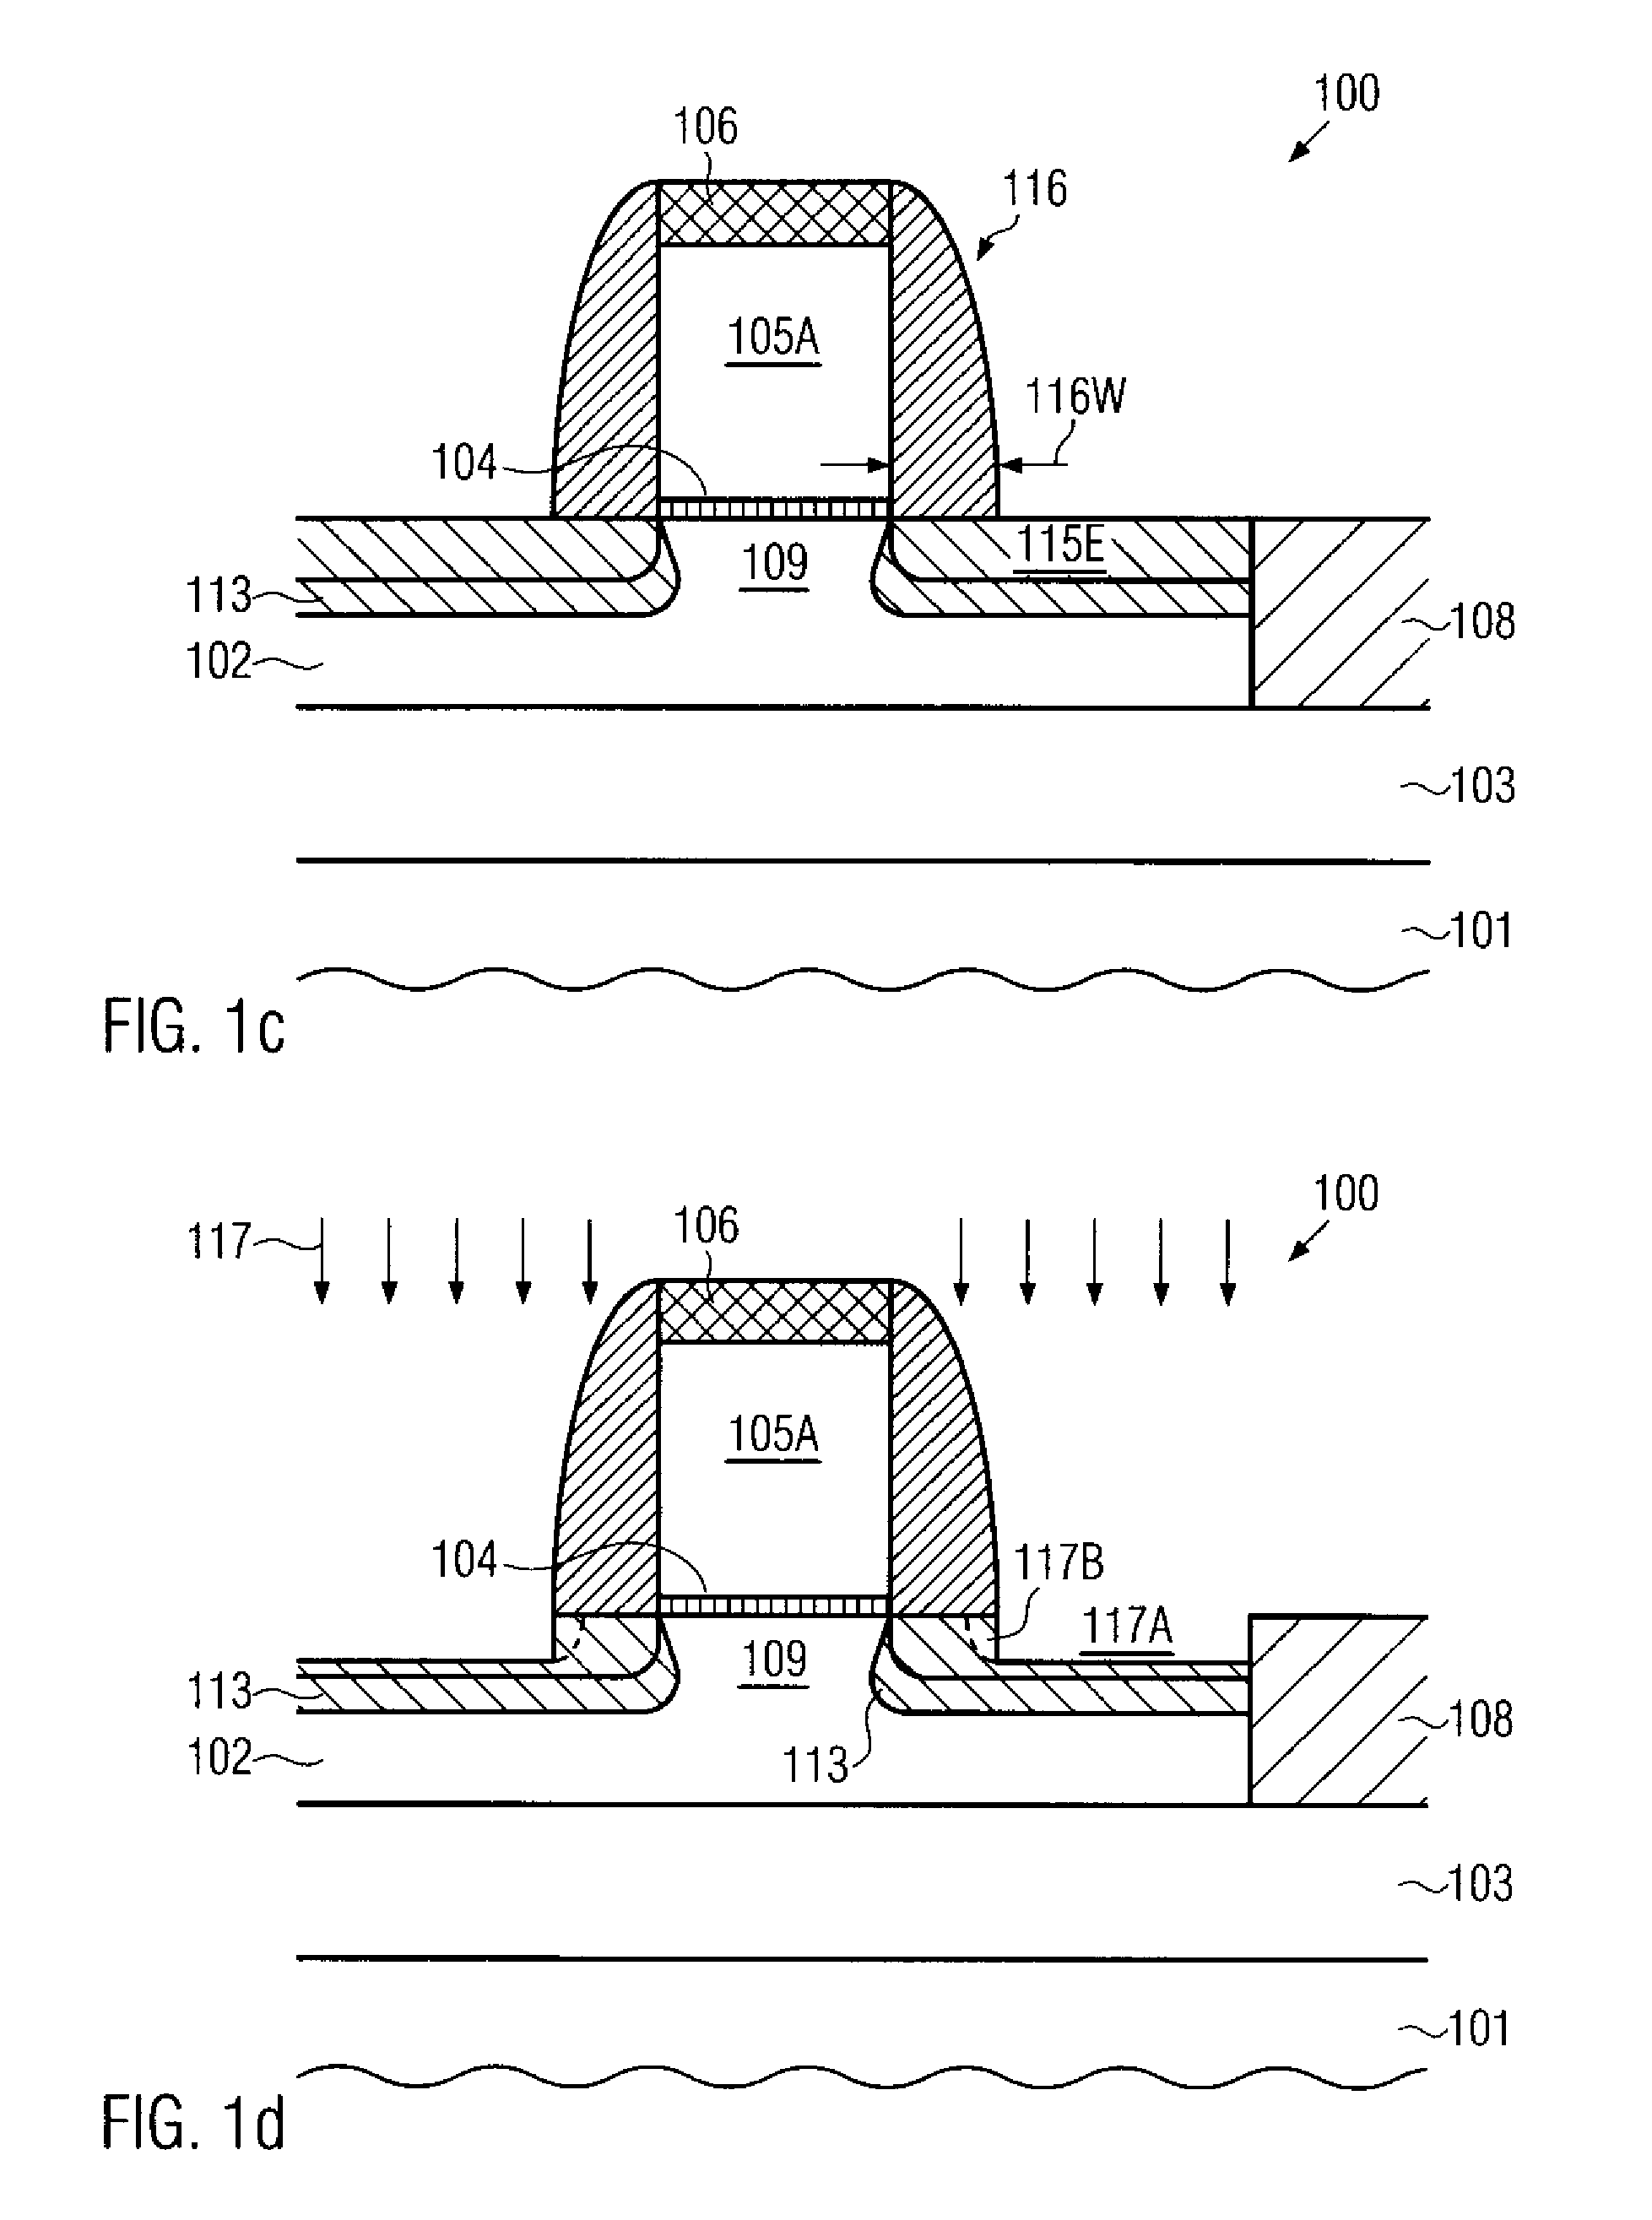 Reducing transistor junction capacitance by recessing drain and source regions